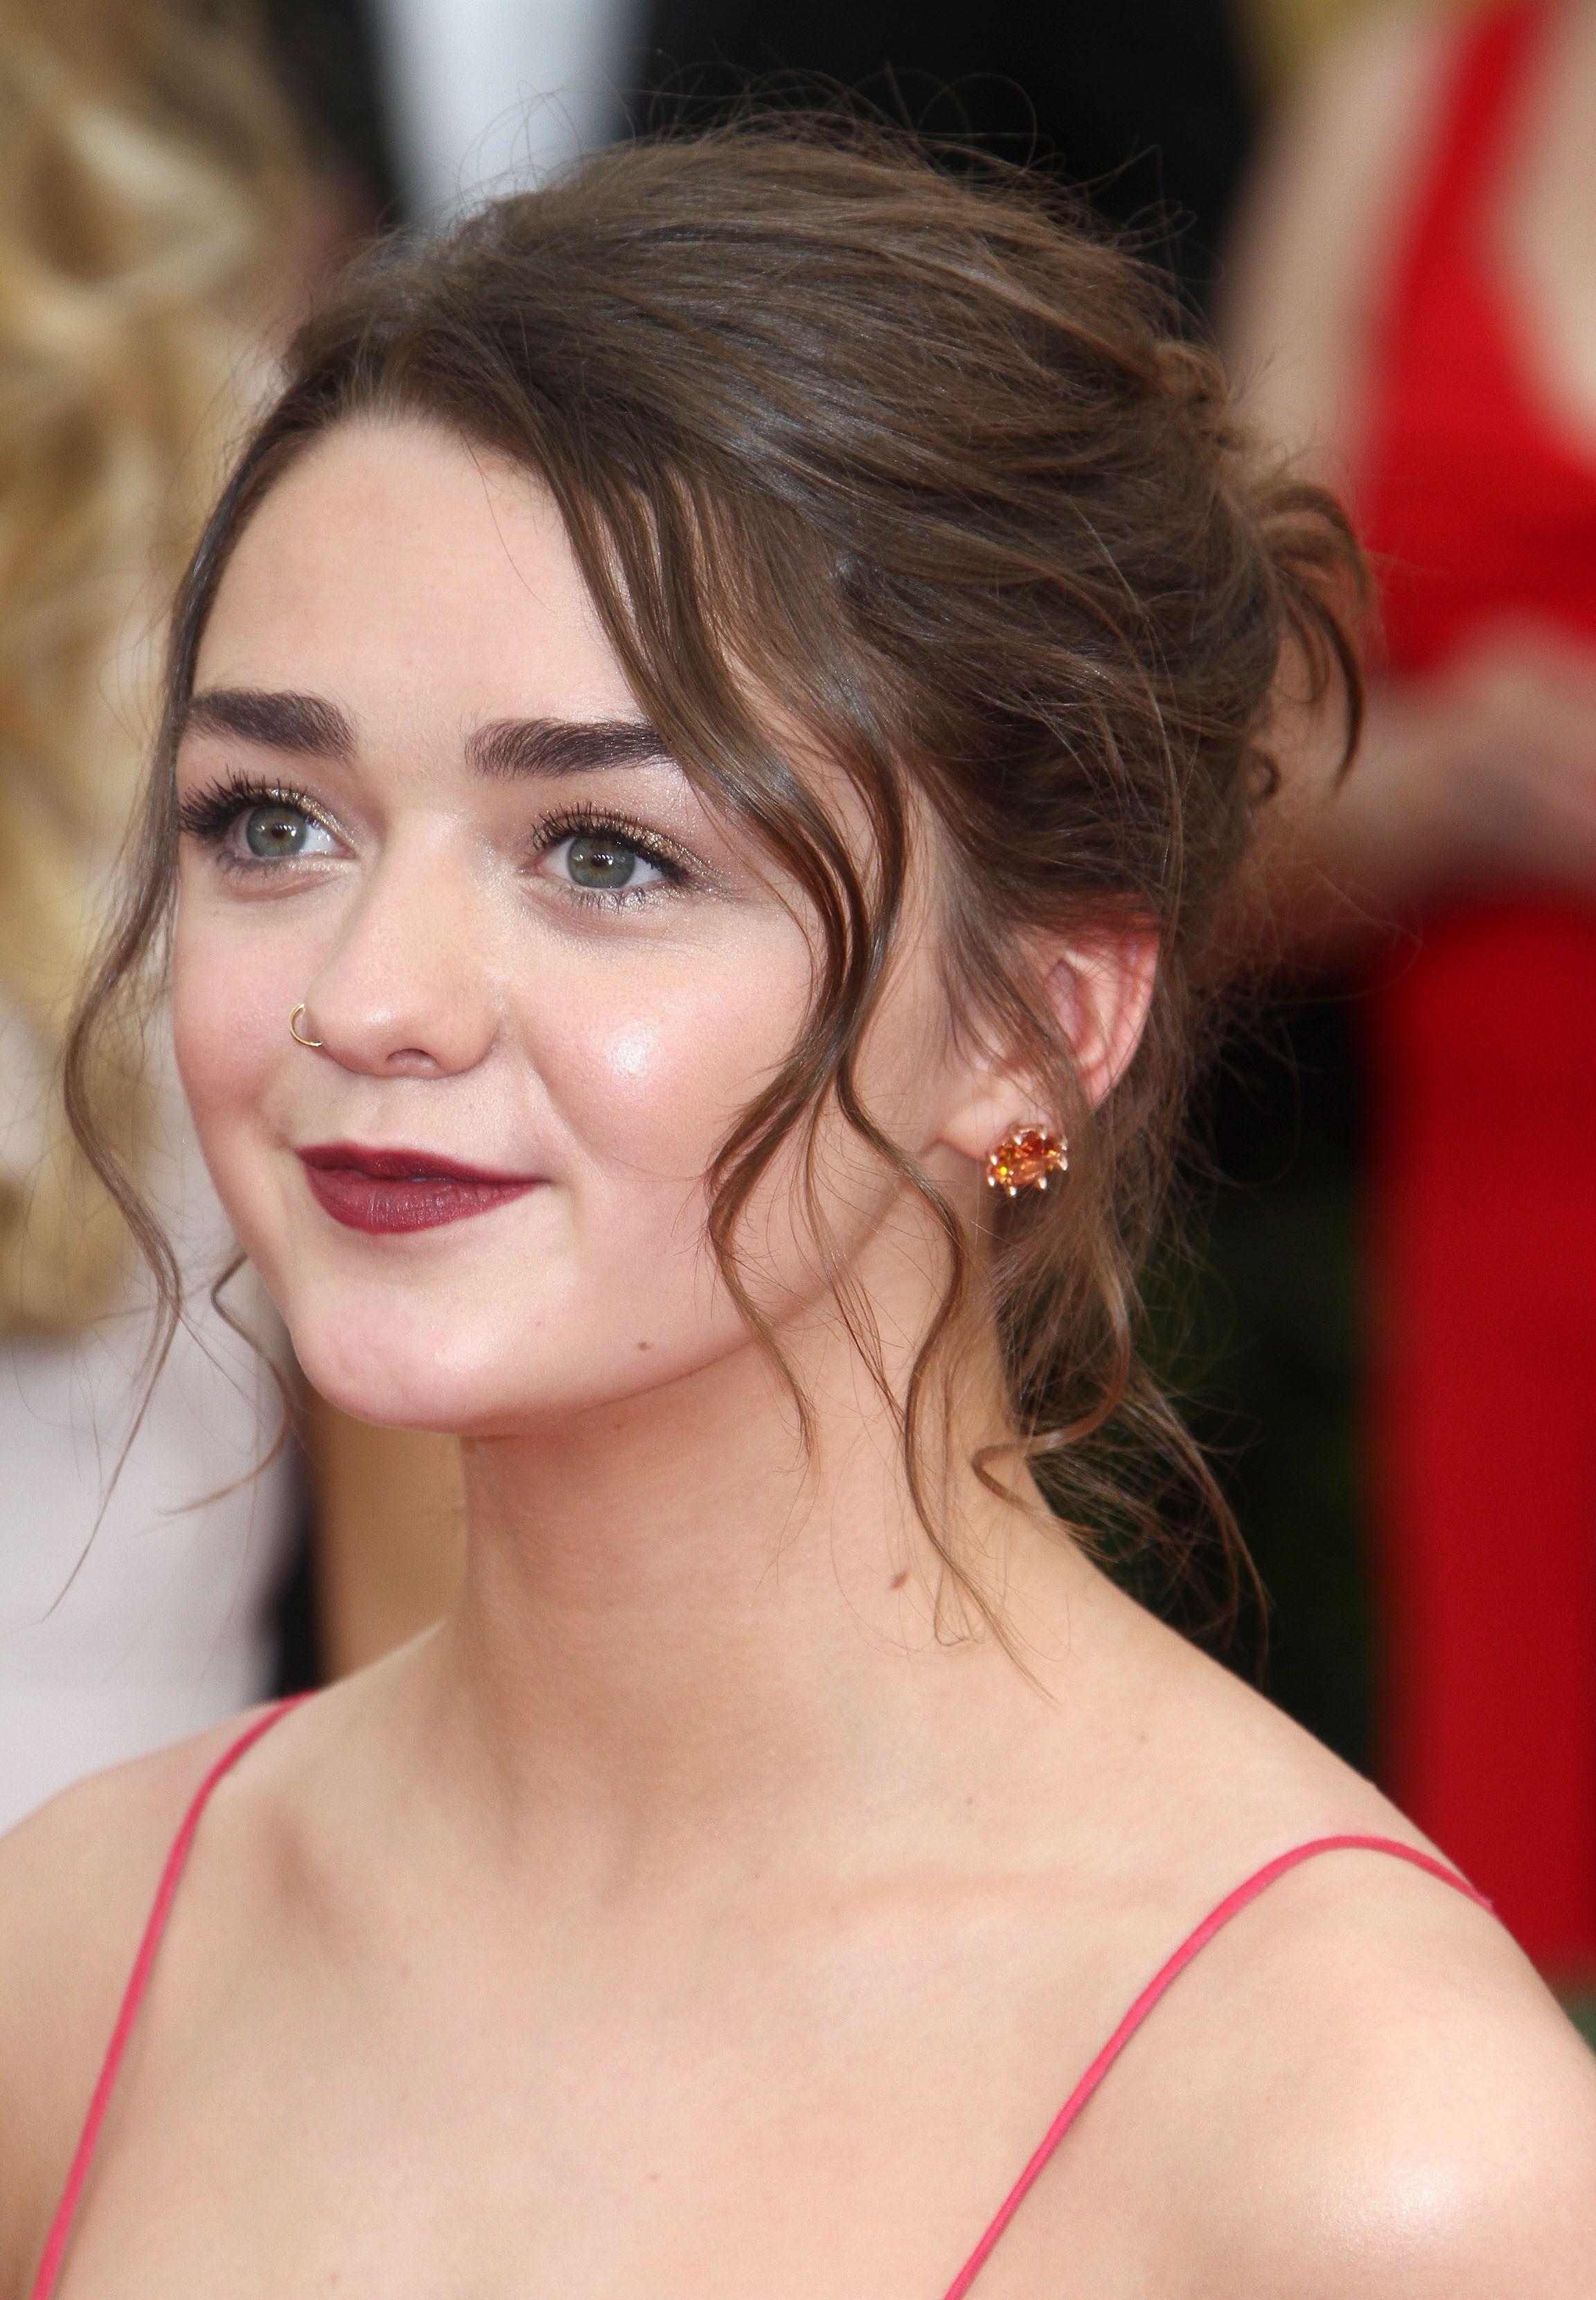 Maisie Williams Wallpapers - Wallpaper Cave